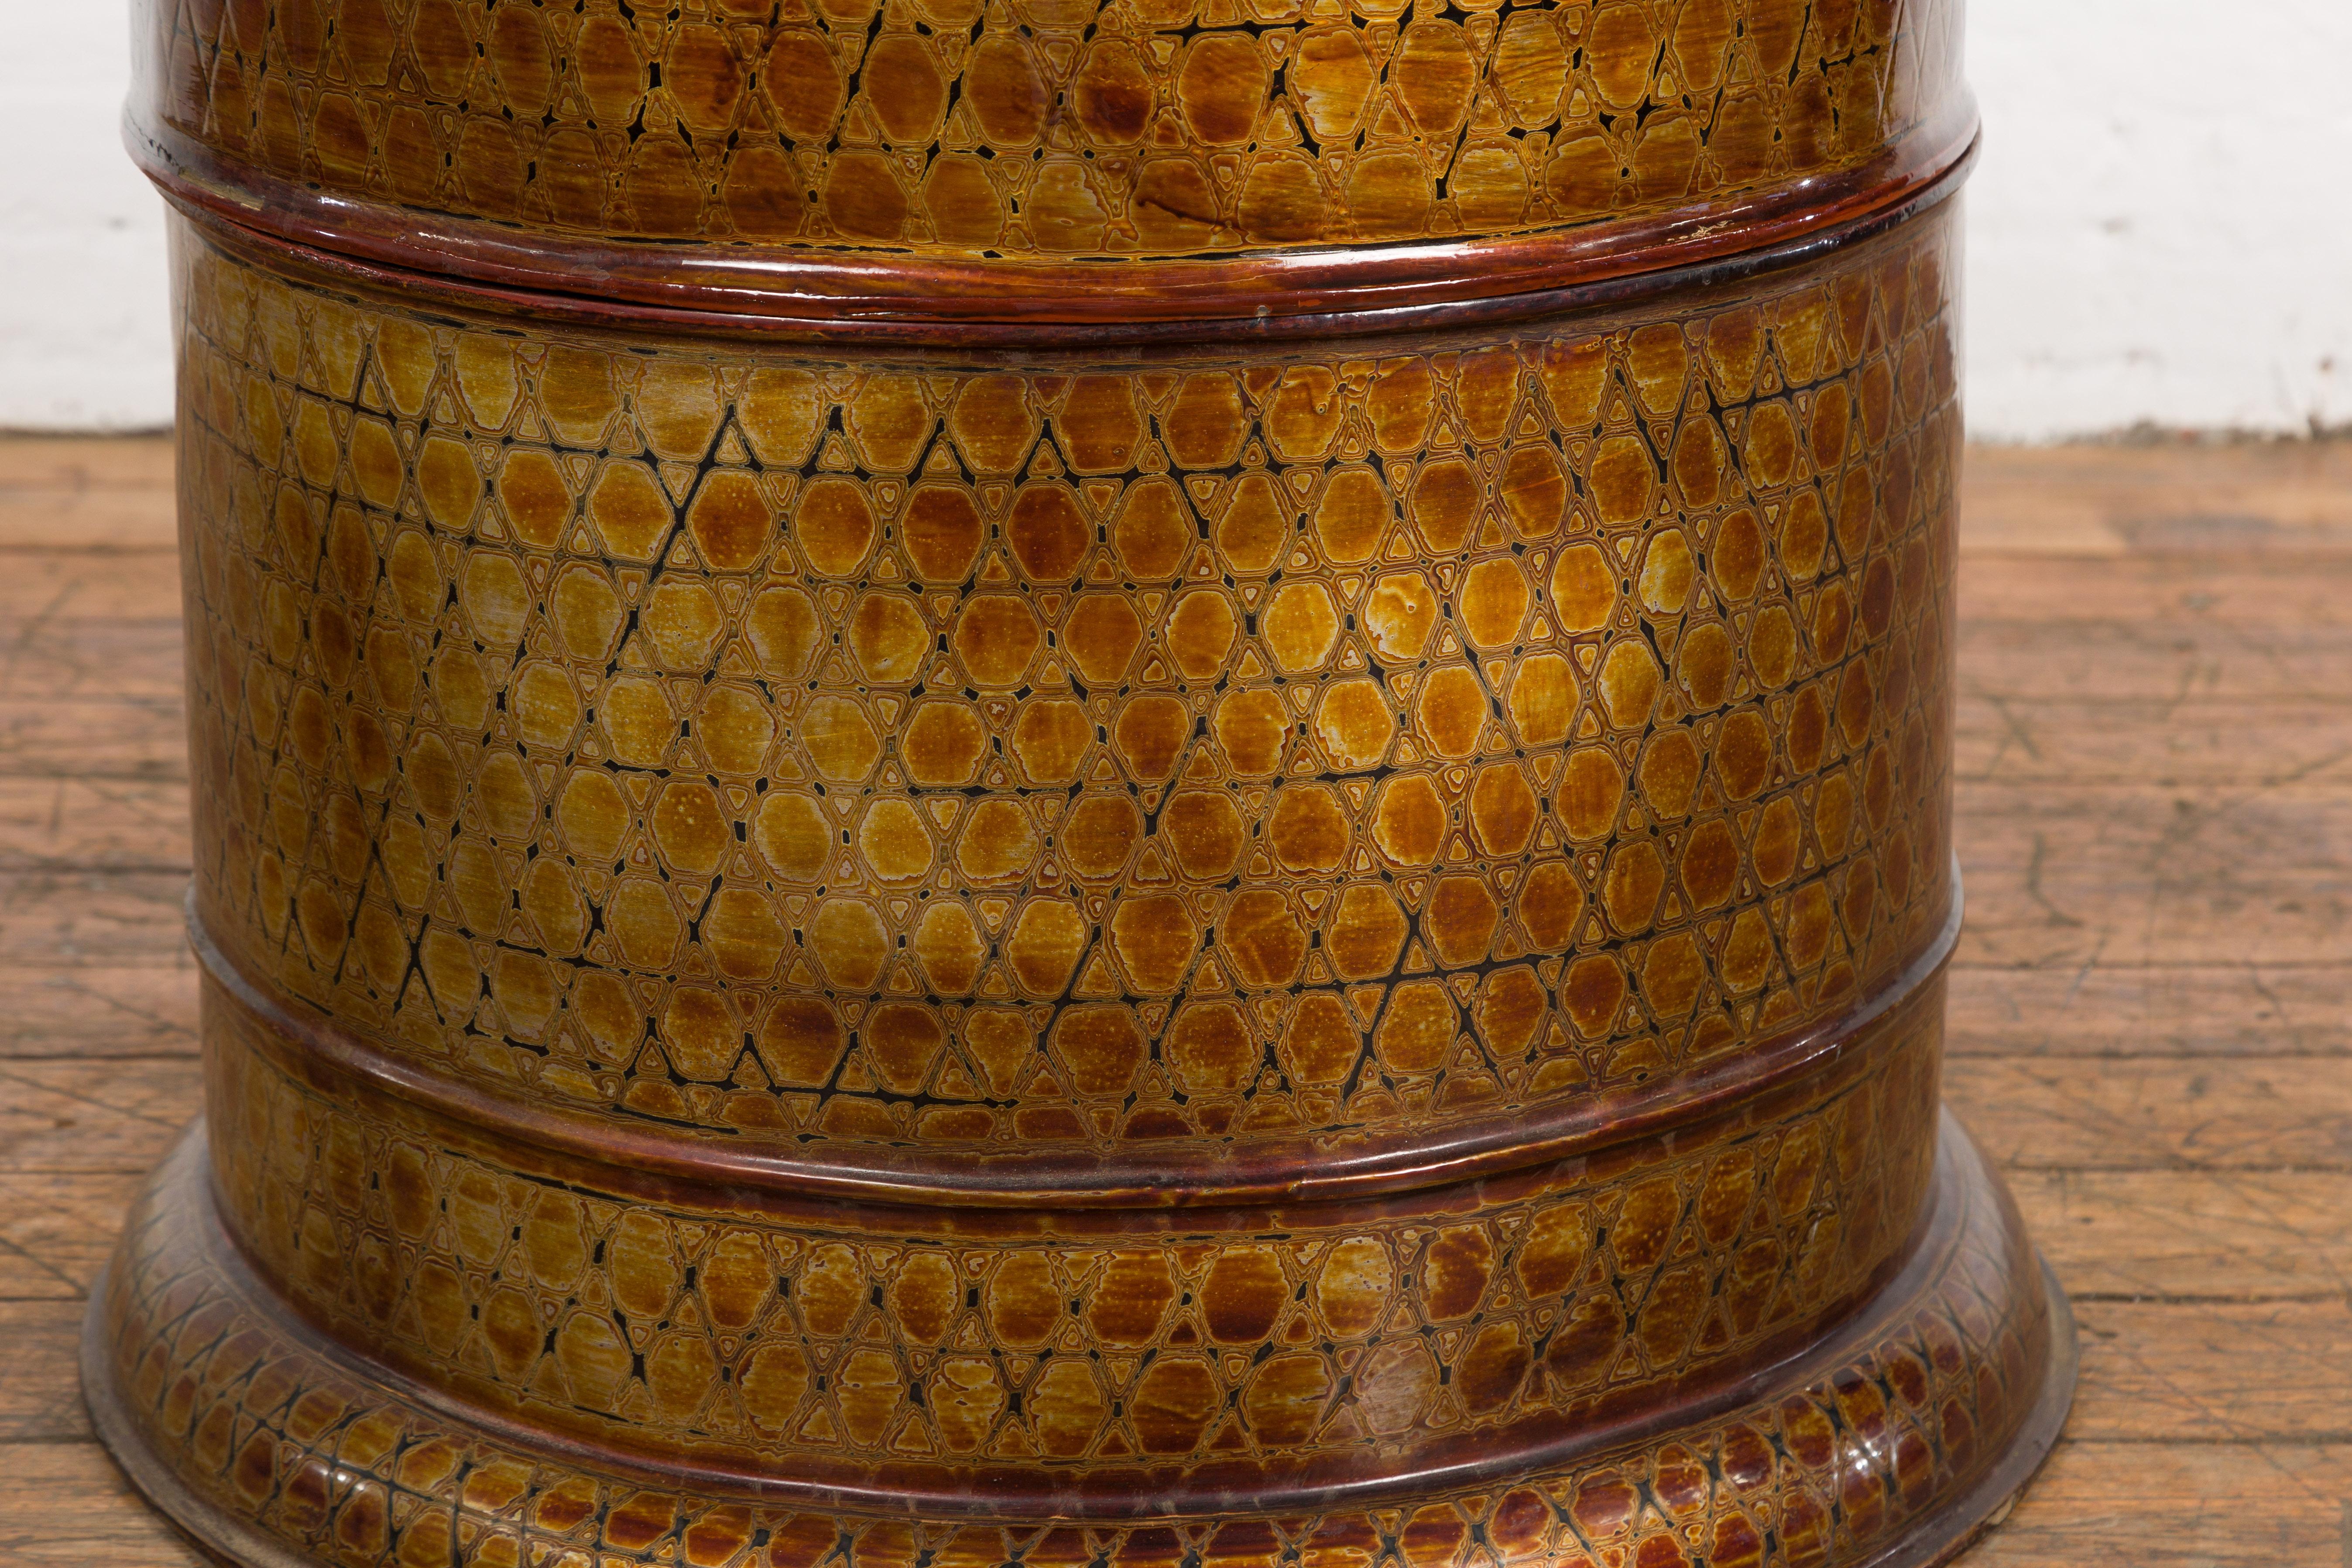 Thai Vintage Negora Lacquer Circular Storage Bin with Snake Skin Patterns In Good Condition For Sale In Yonkers, NY